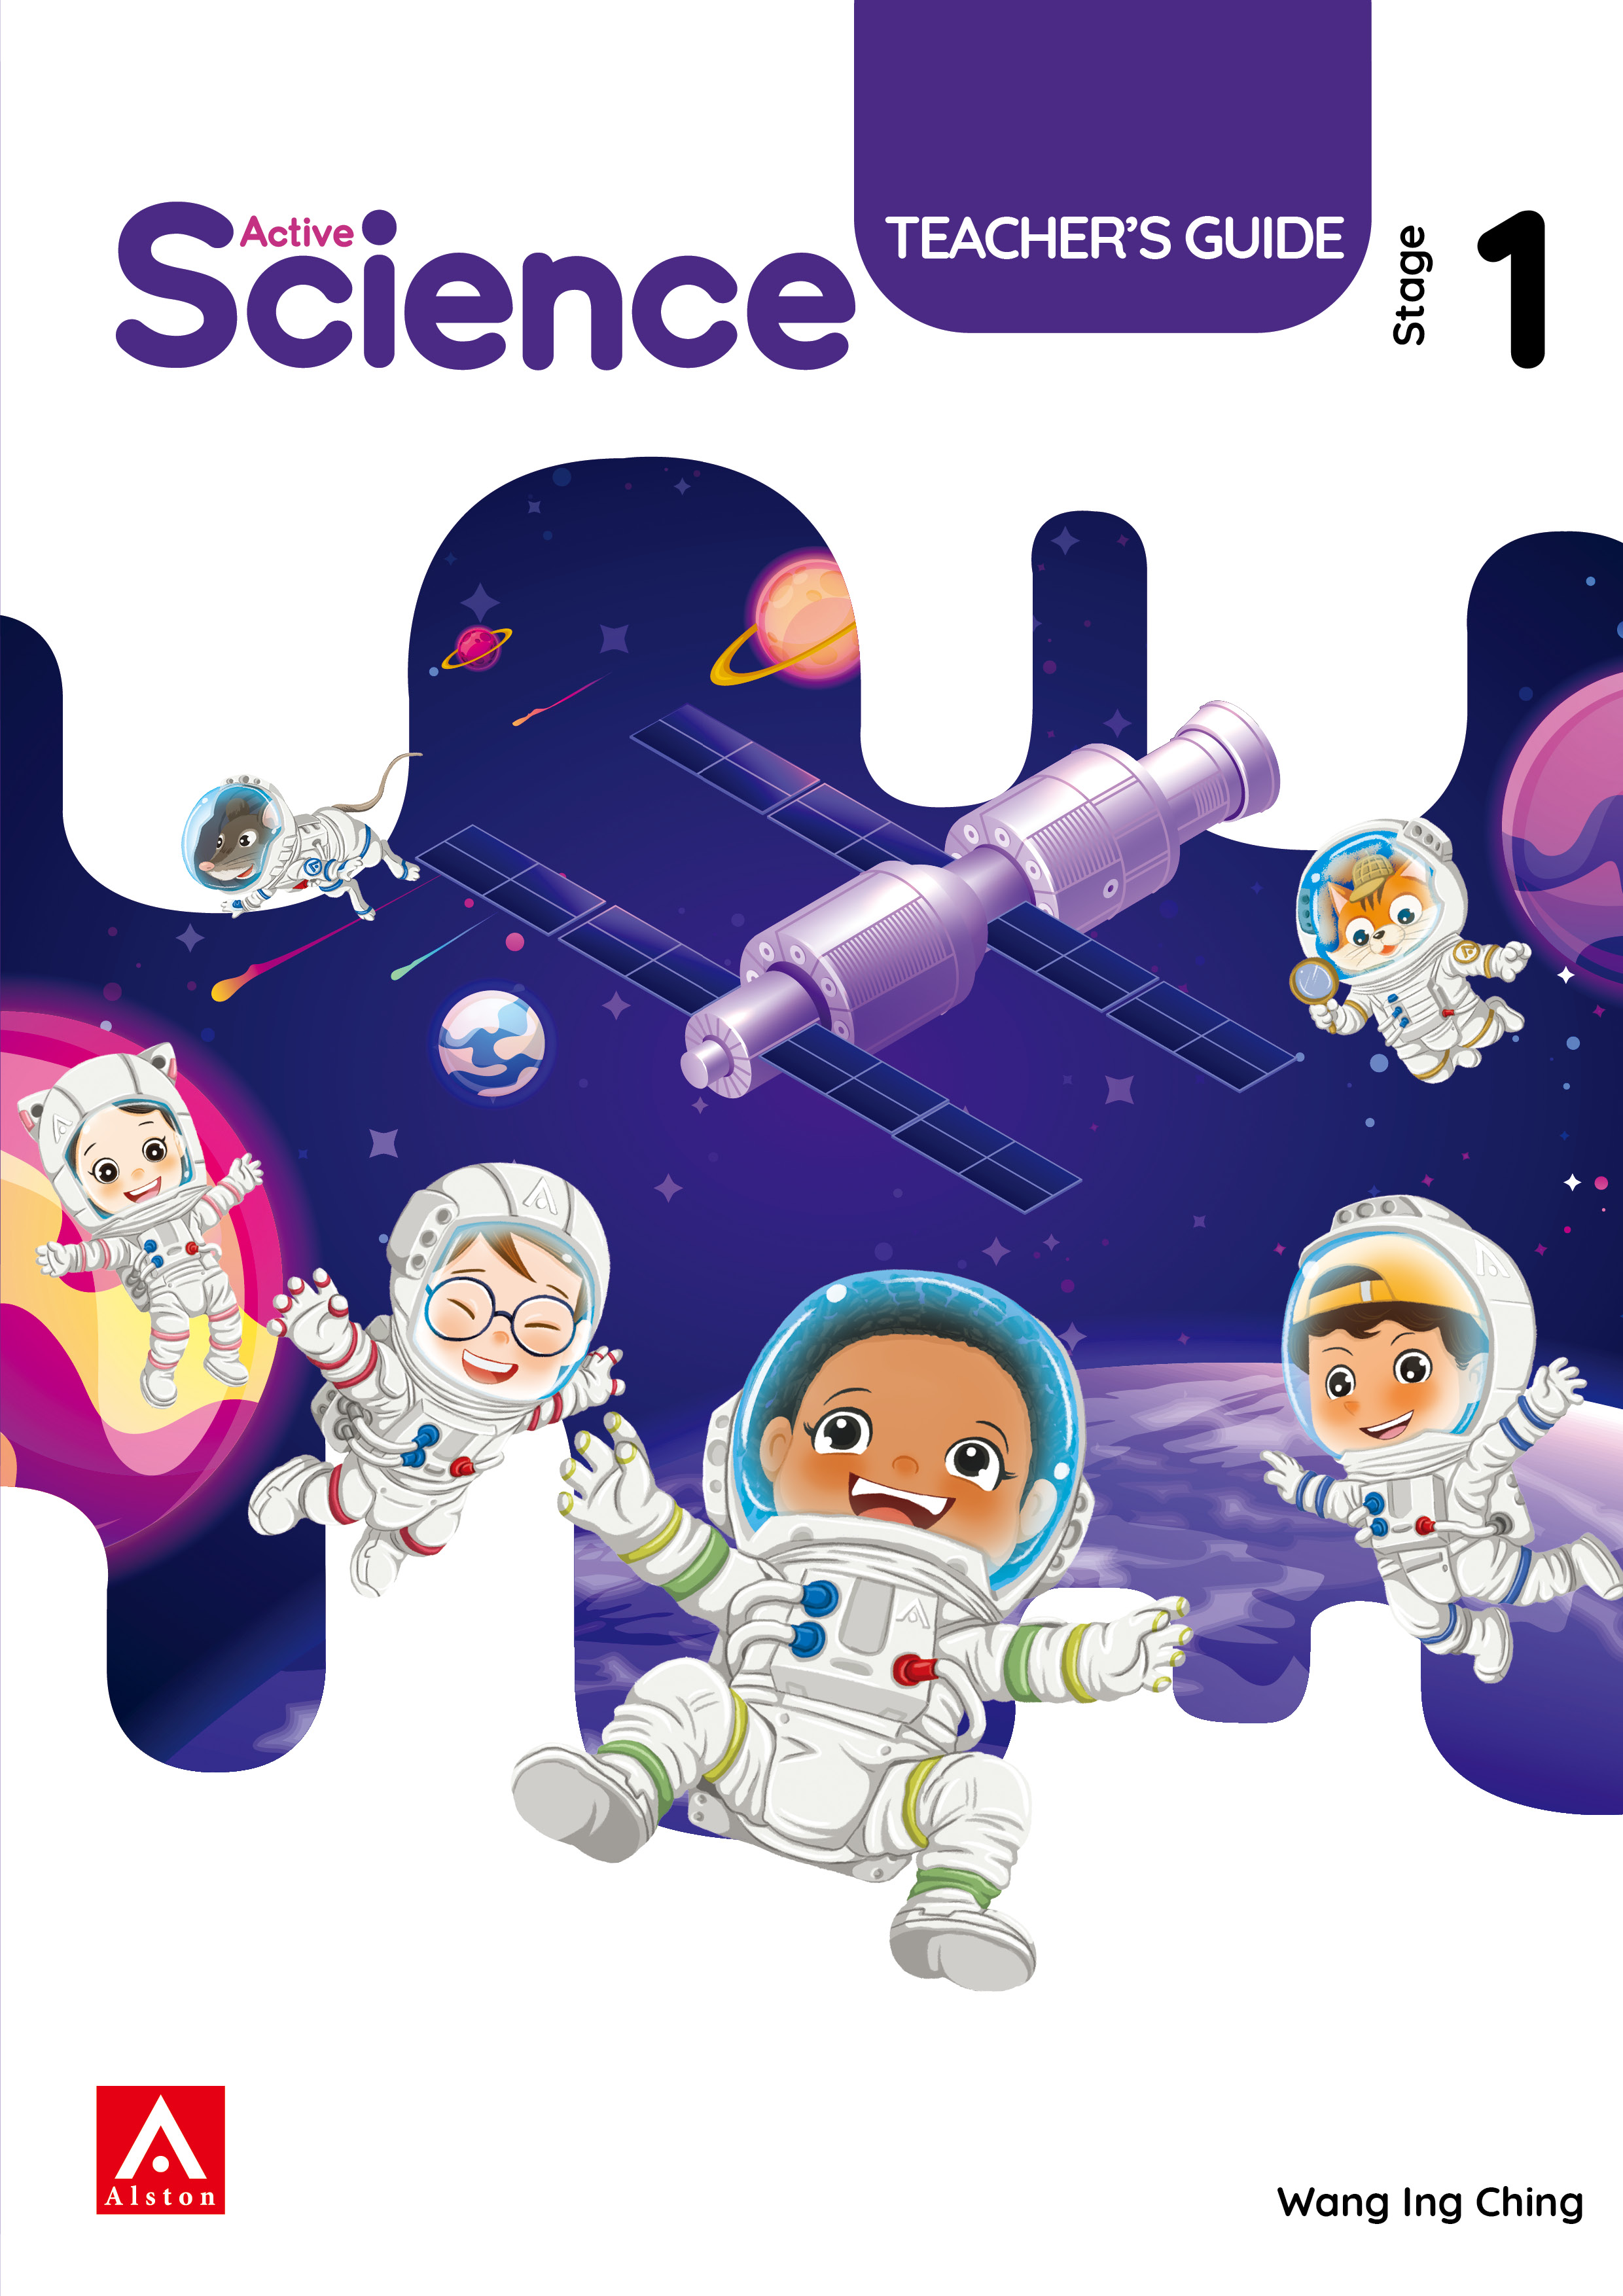 Active Science TG 1 Cover